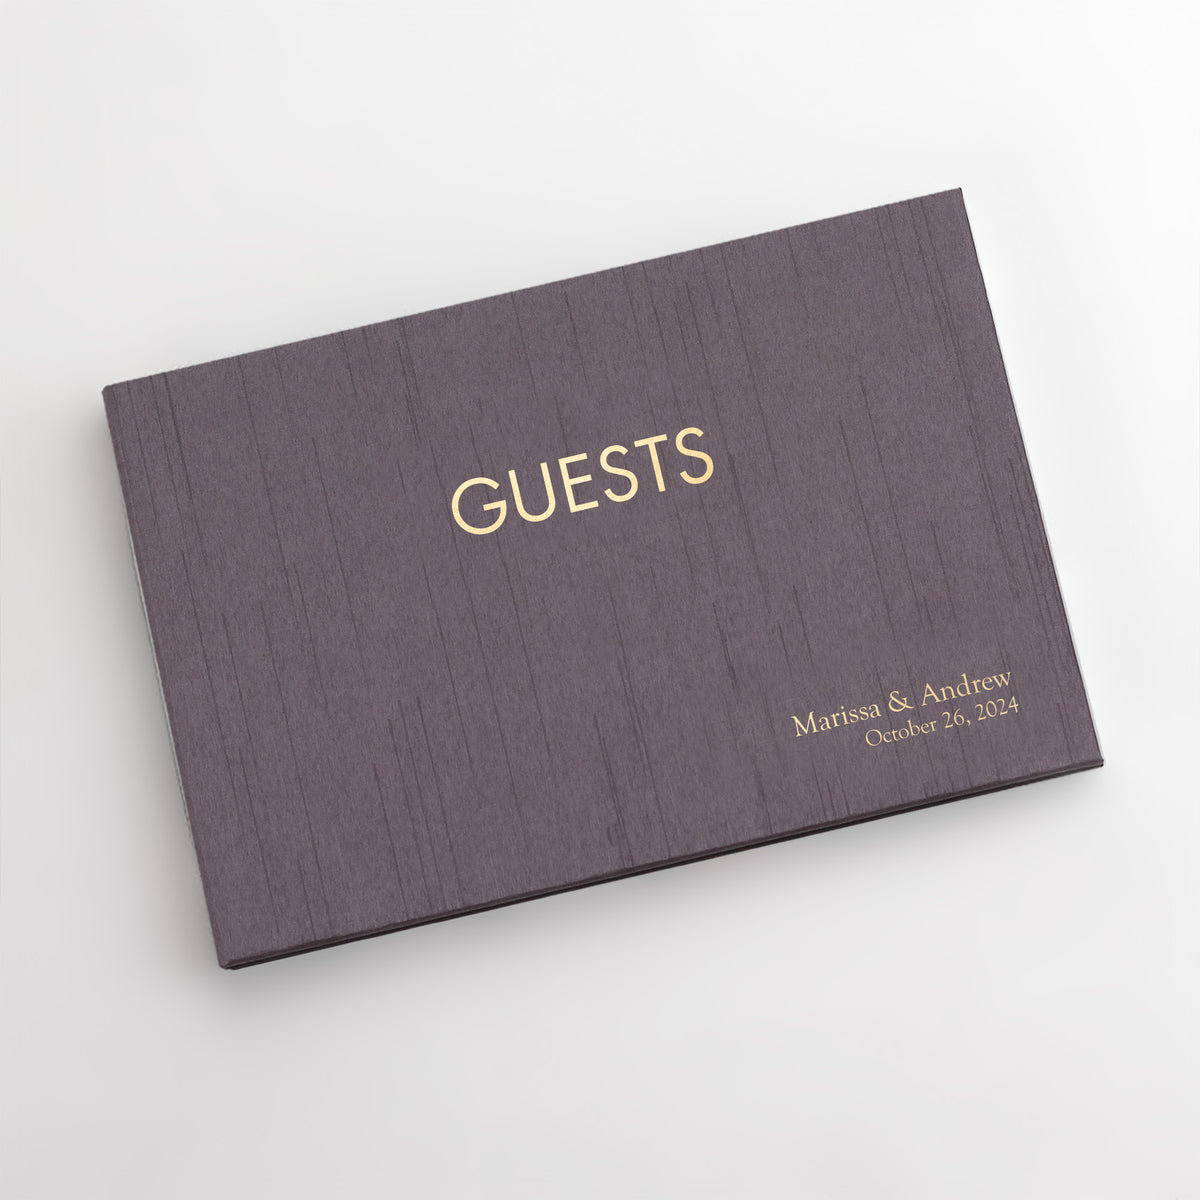 Guestbook Embossed with “Guests” with Amethyst Silk Cover